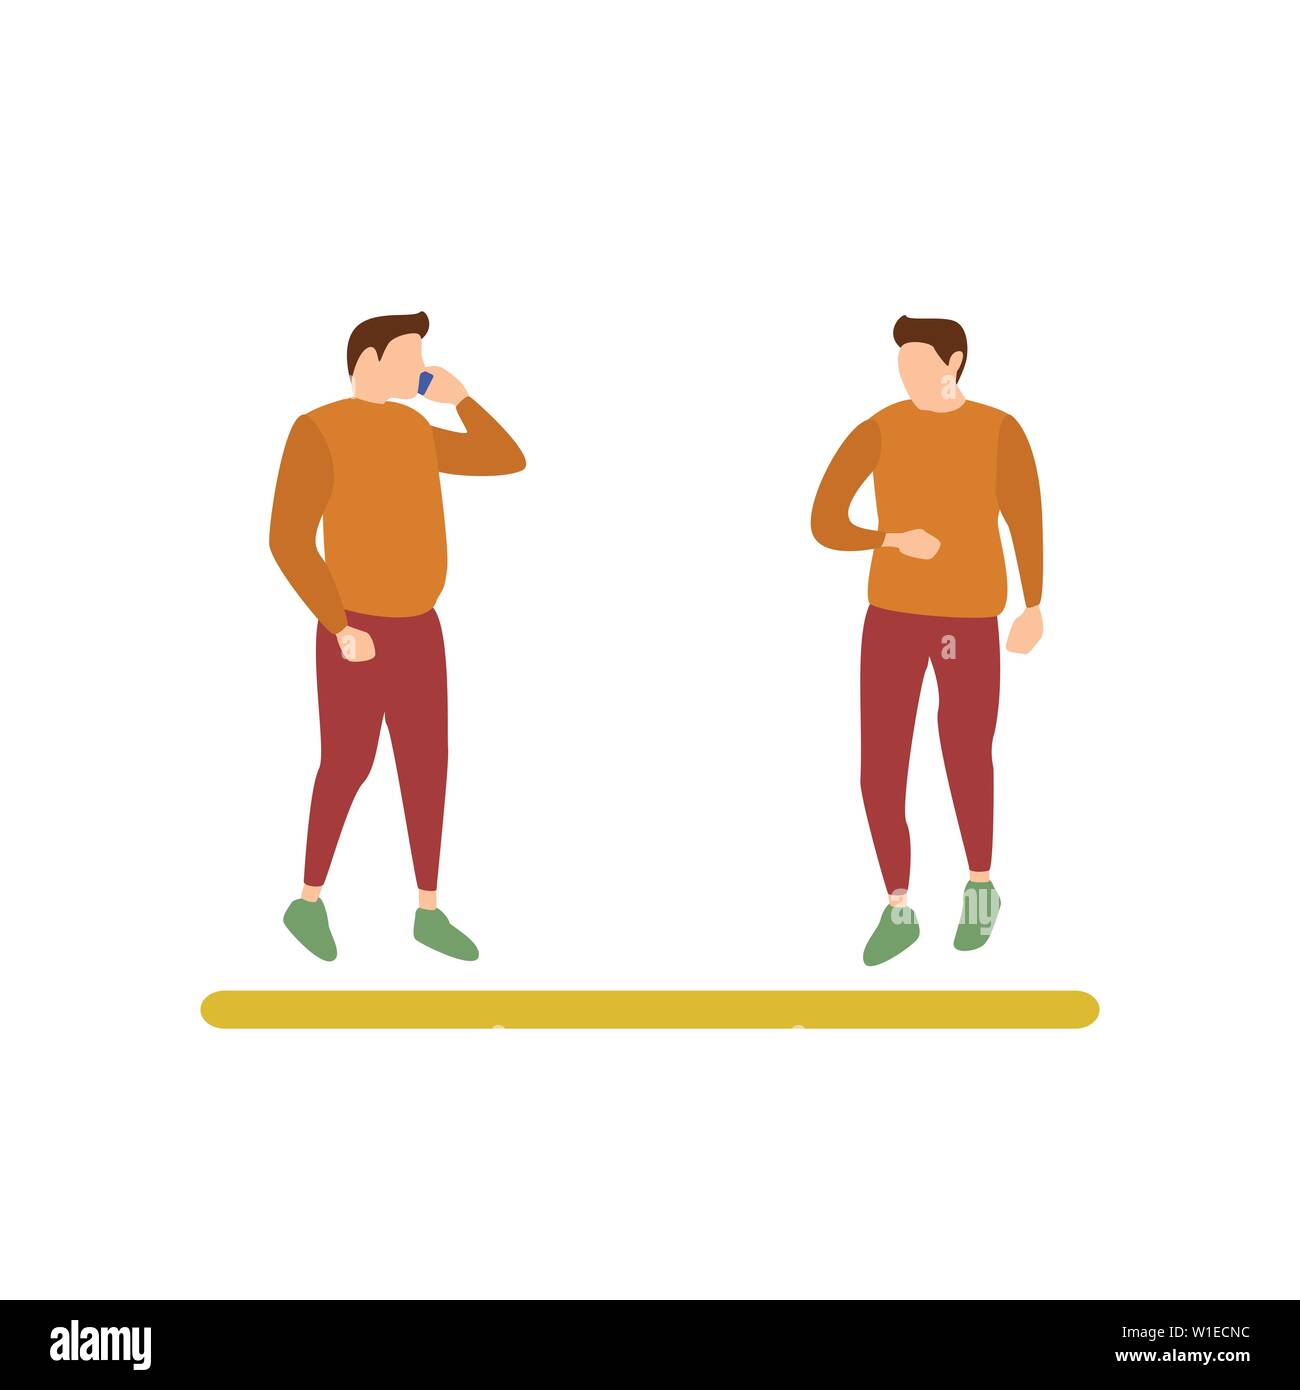 Flat Design Character of a Guy Calling and a Guy in a Hurry Looking His Watch, Human Activities Bus Stop Stock Vector